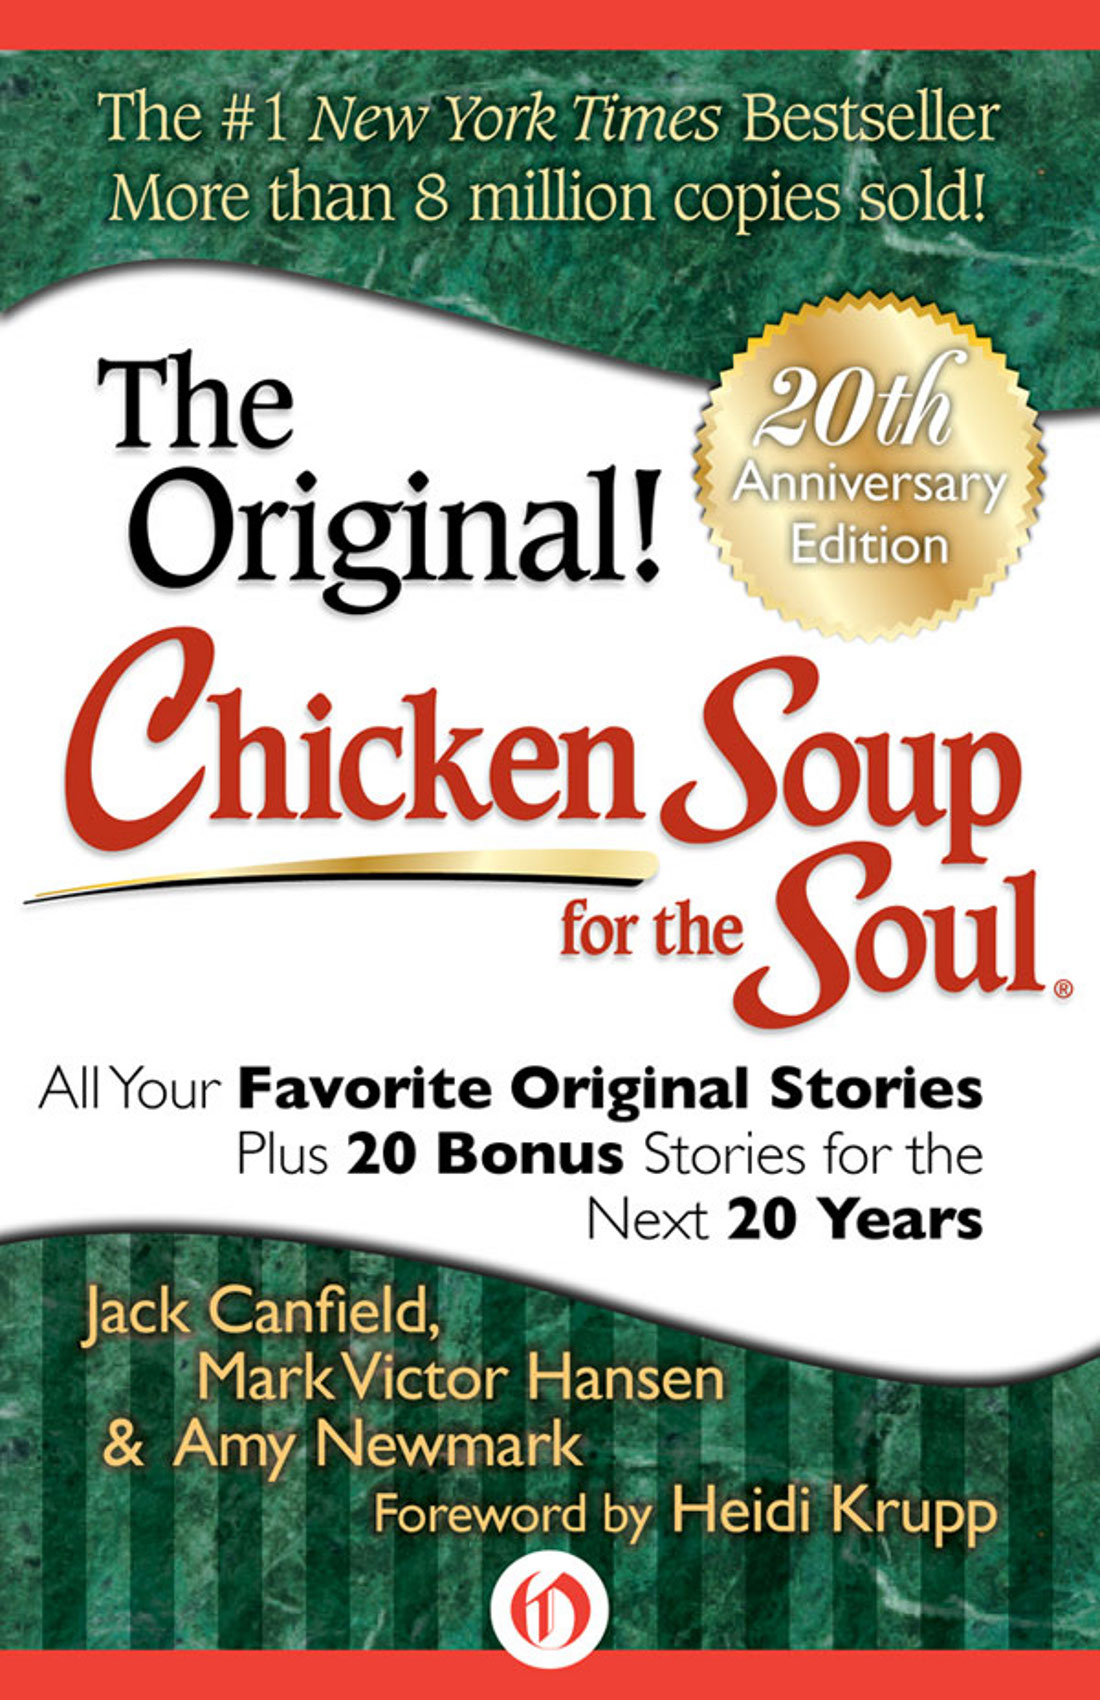 Chicken Soup for the Soul 20th Anniversary Edition by Jack Canfield